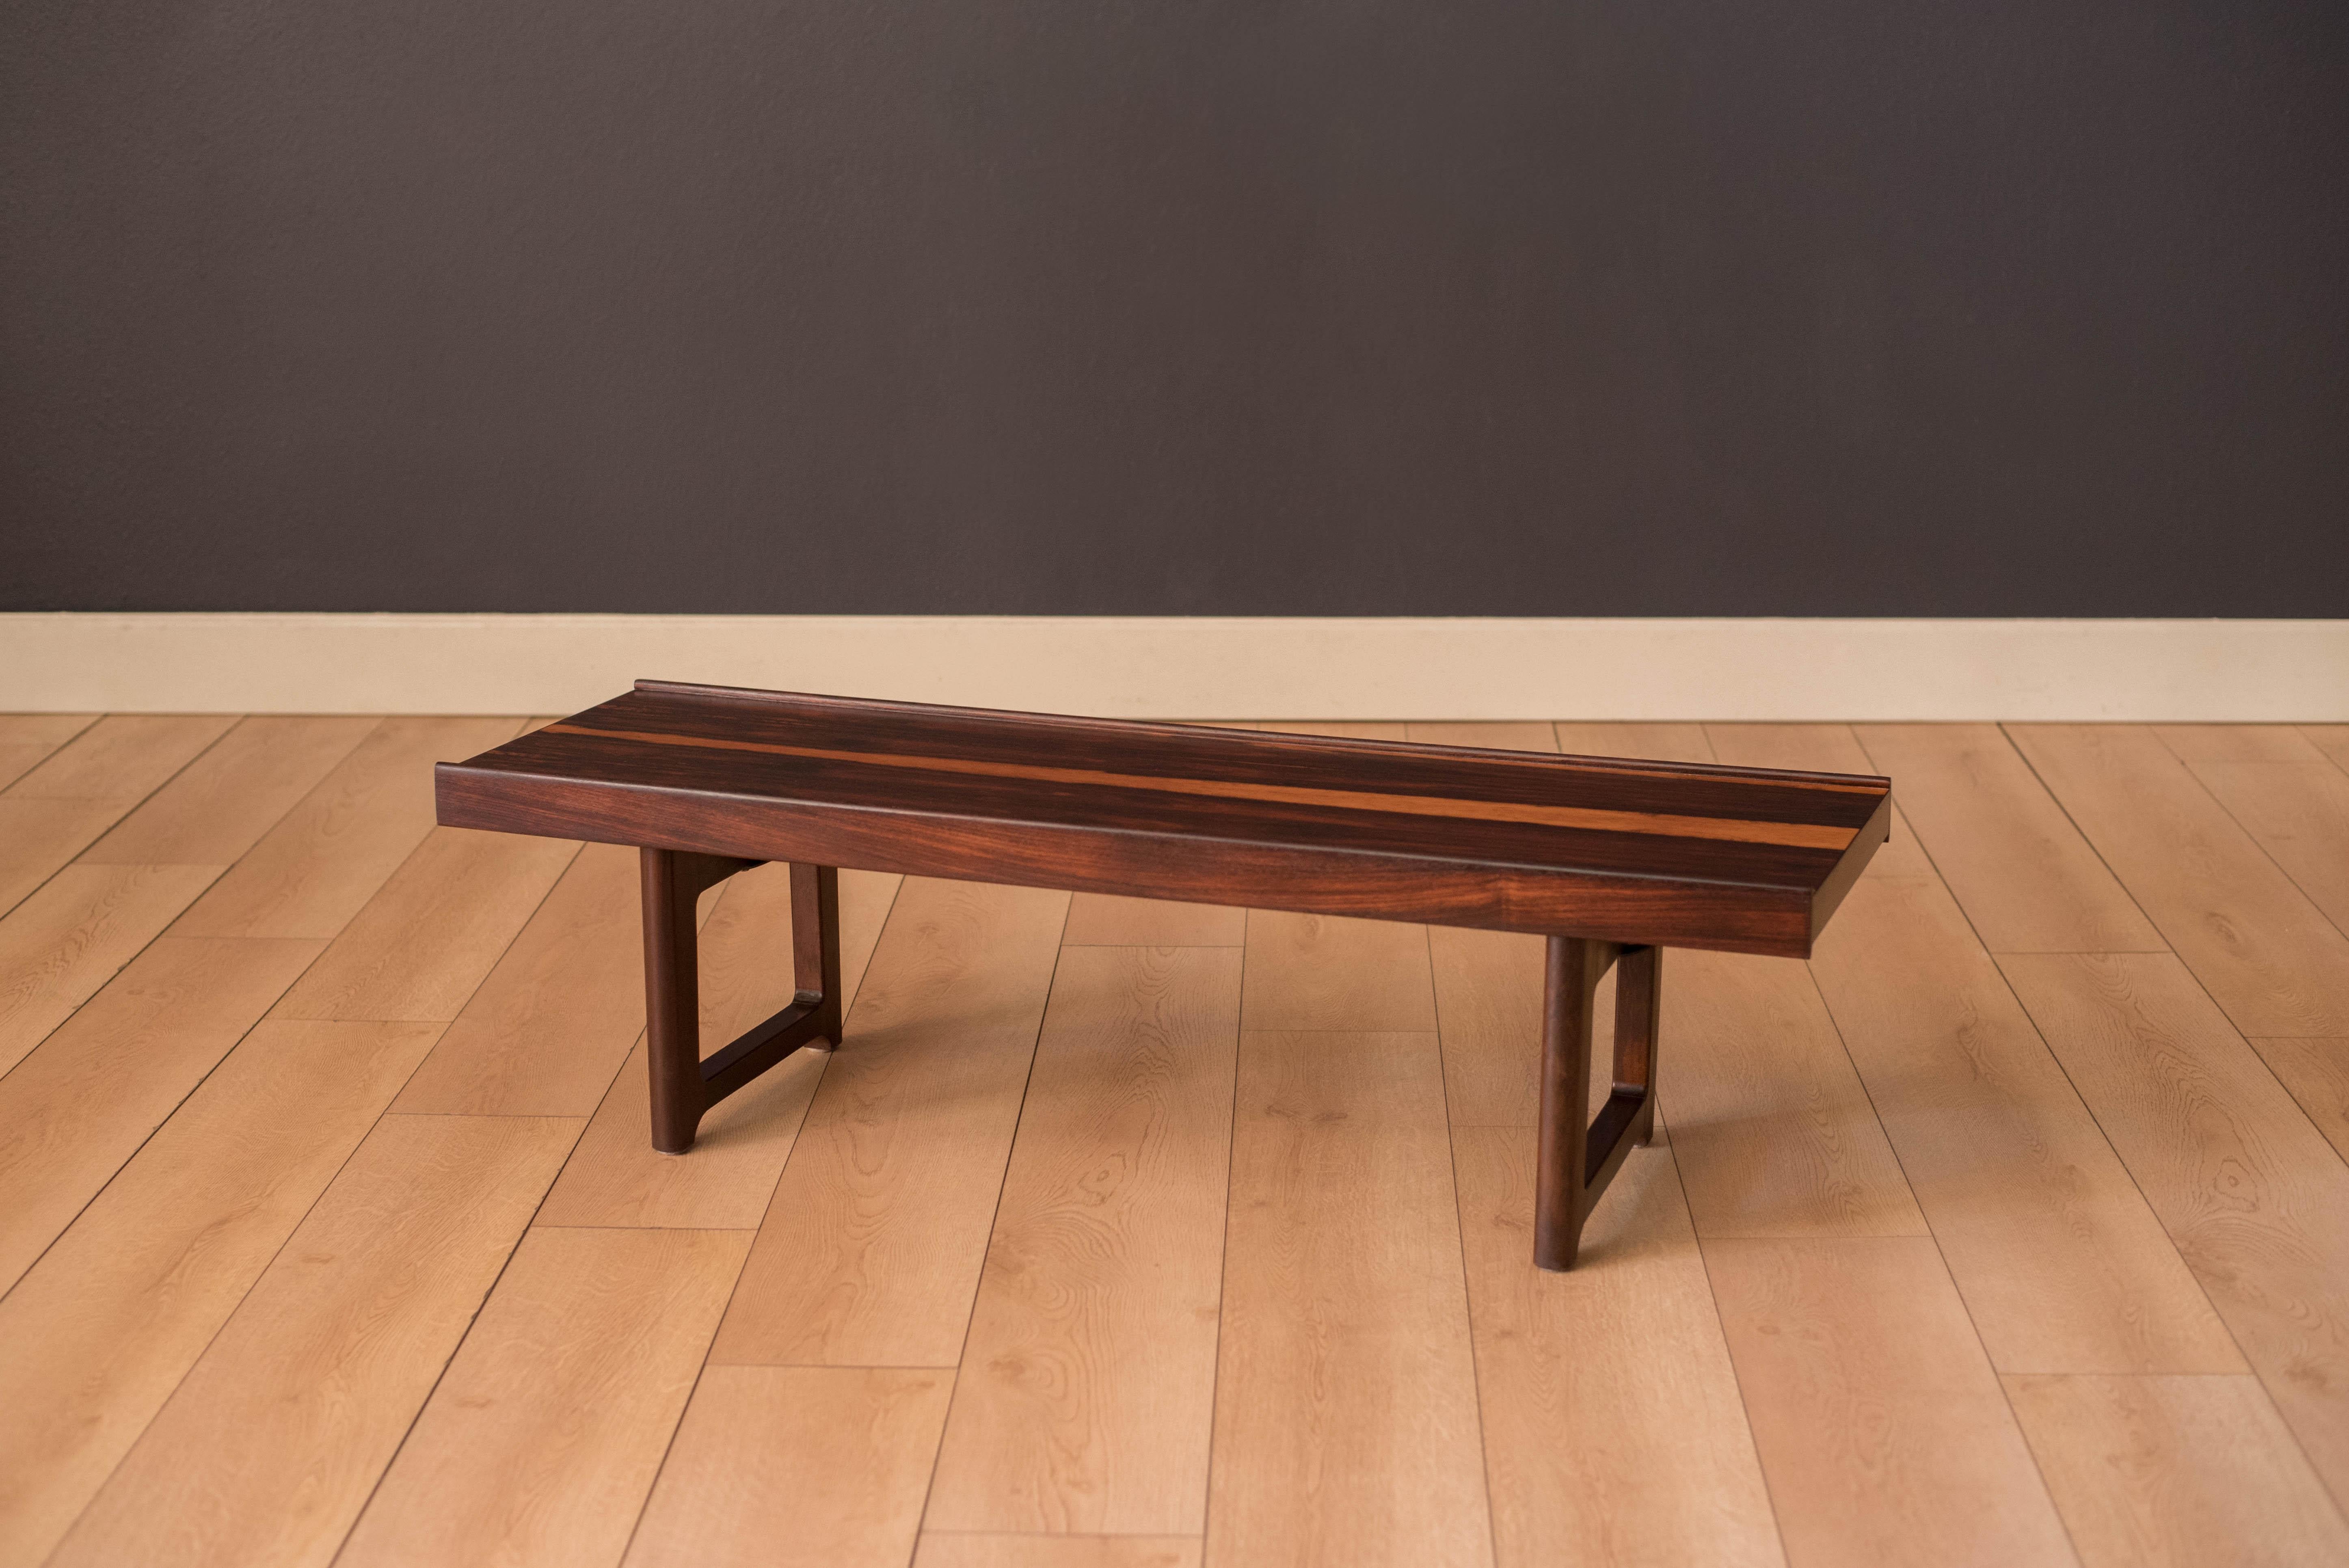 Mid-Century Modern low coffee table bench designed by Torbjørn Afdal for Bruksbo, Norway. This piece displays rich rosewood grains and sculpted edges. The perfect fit for an entryway piece or bedroom seating. 